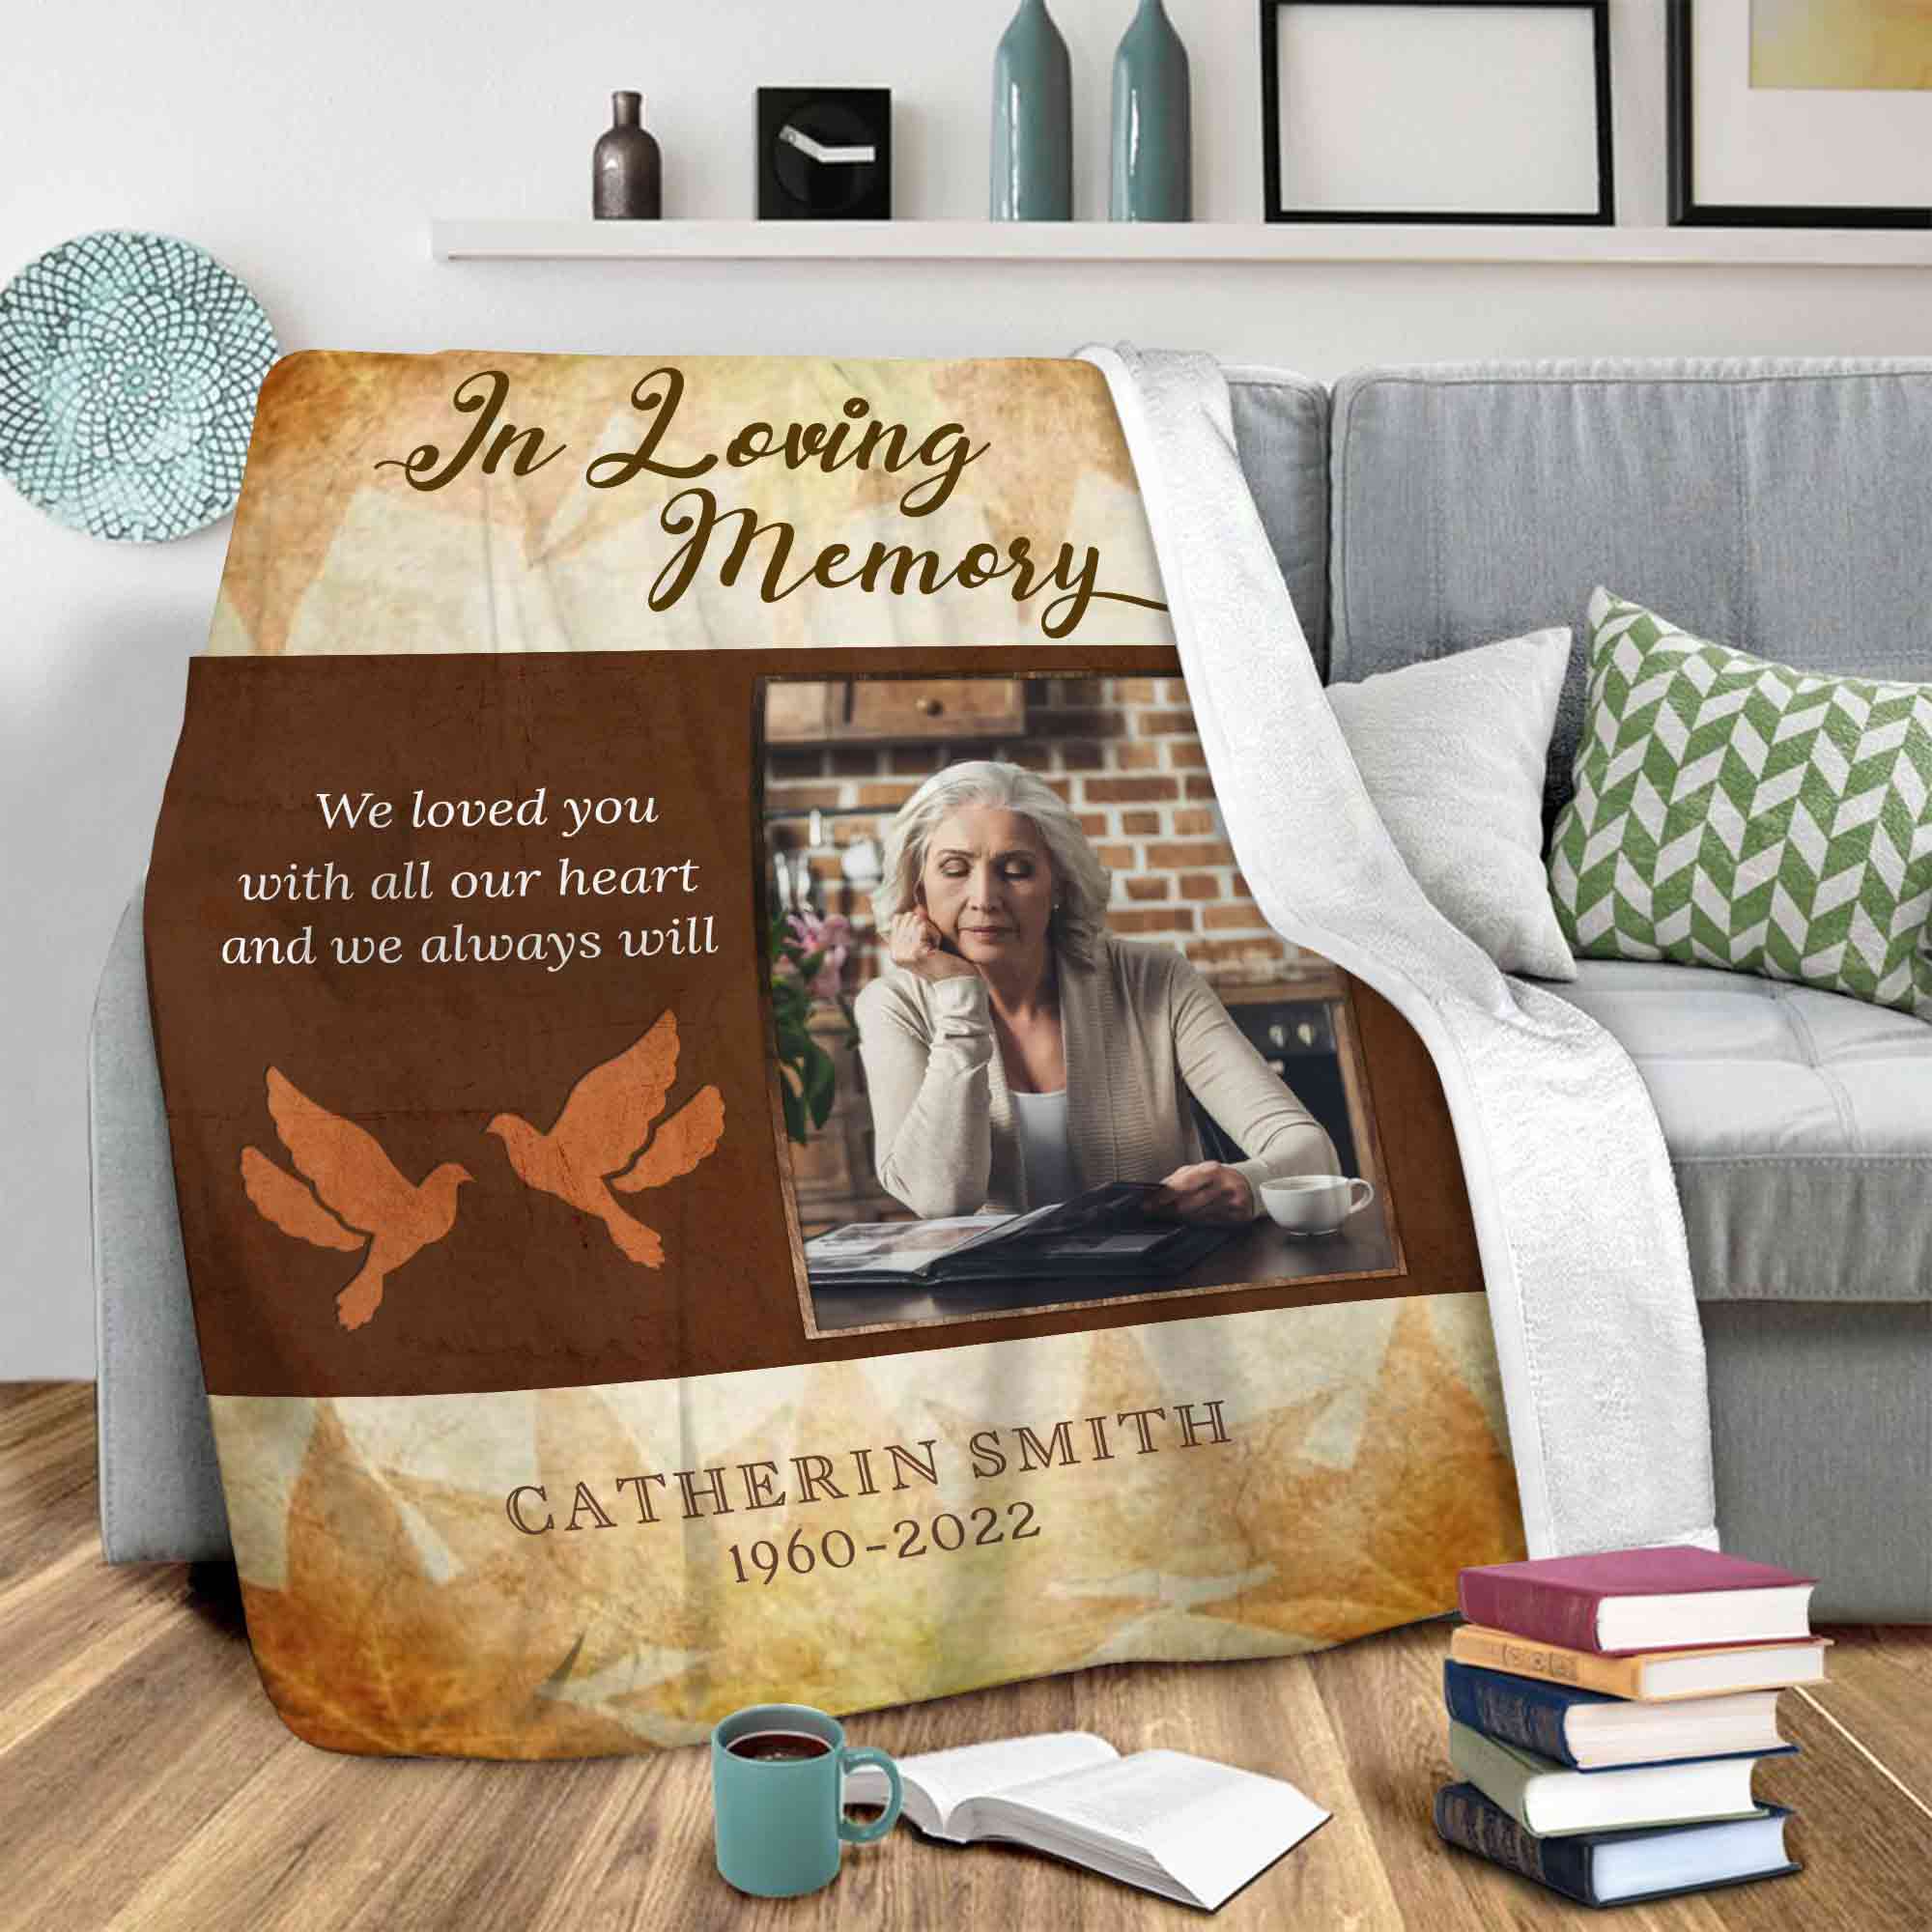 Personalized Memorial Blankets For Loss Of Mother, In Loving Memory Blankets For Mothers Day Gift, Custom Photo Keepsake Blankets